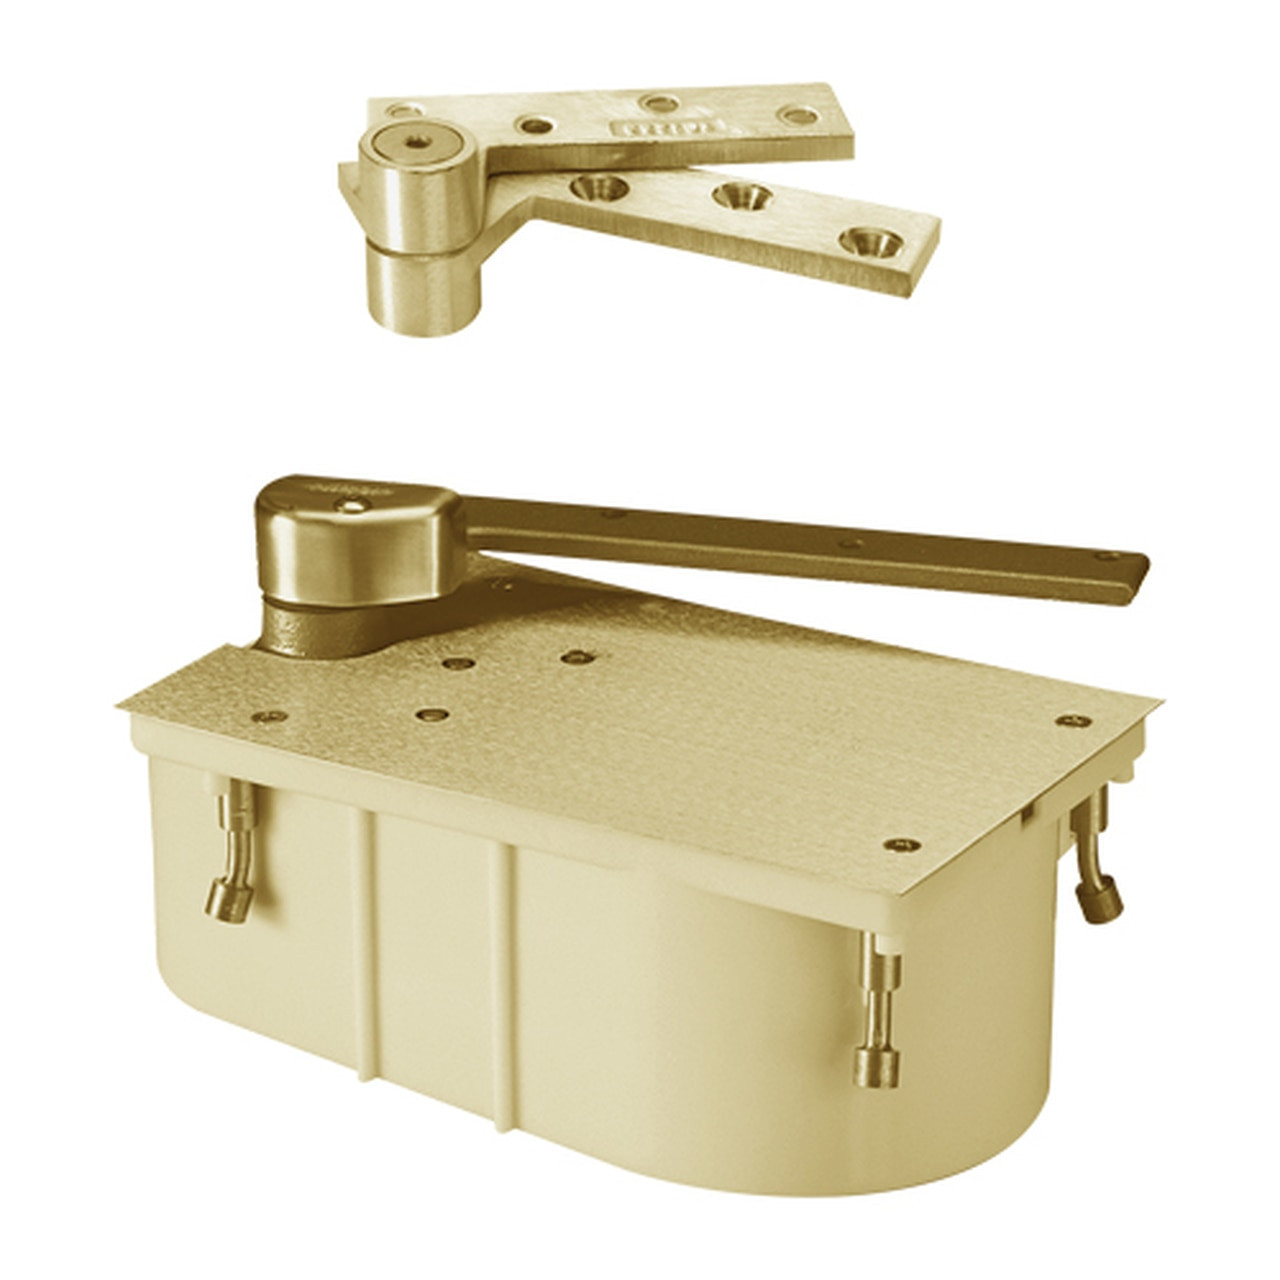 F27-105N-LFP-CWF-LH-606 Rixson 27 Series Fire Rated Heavy Duty 3/4" Offset Hung Floor Closer in Satin Brass Finish